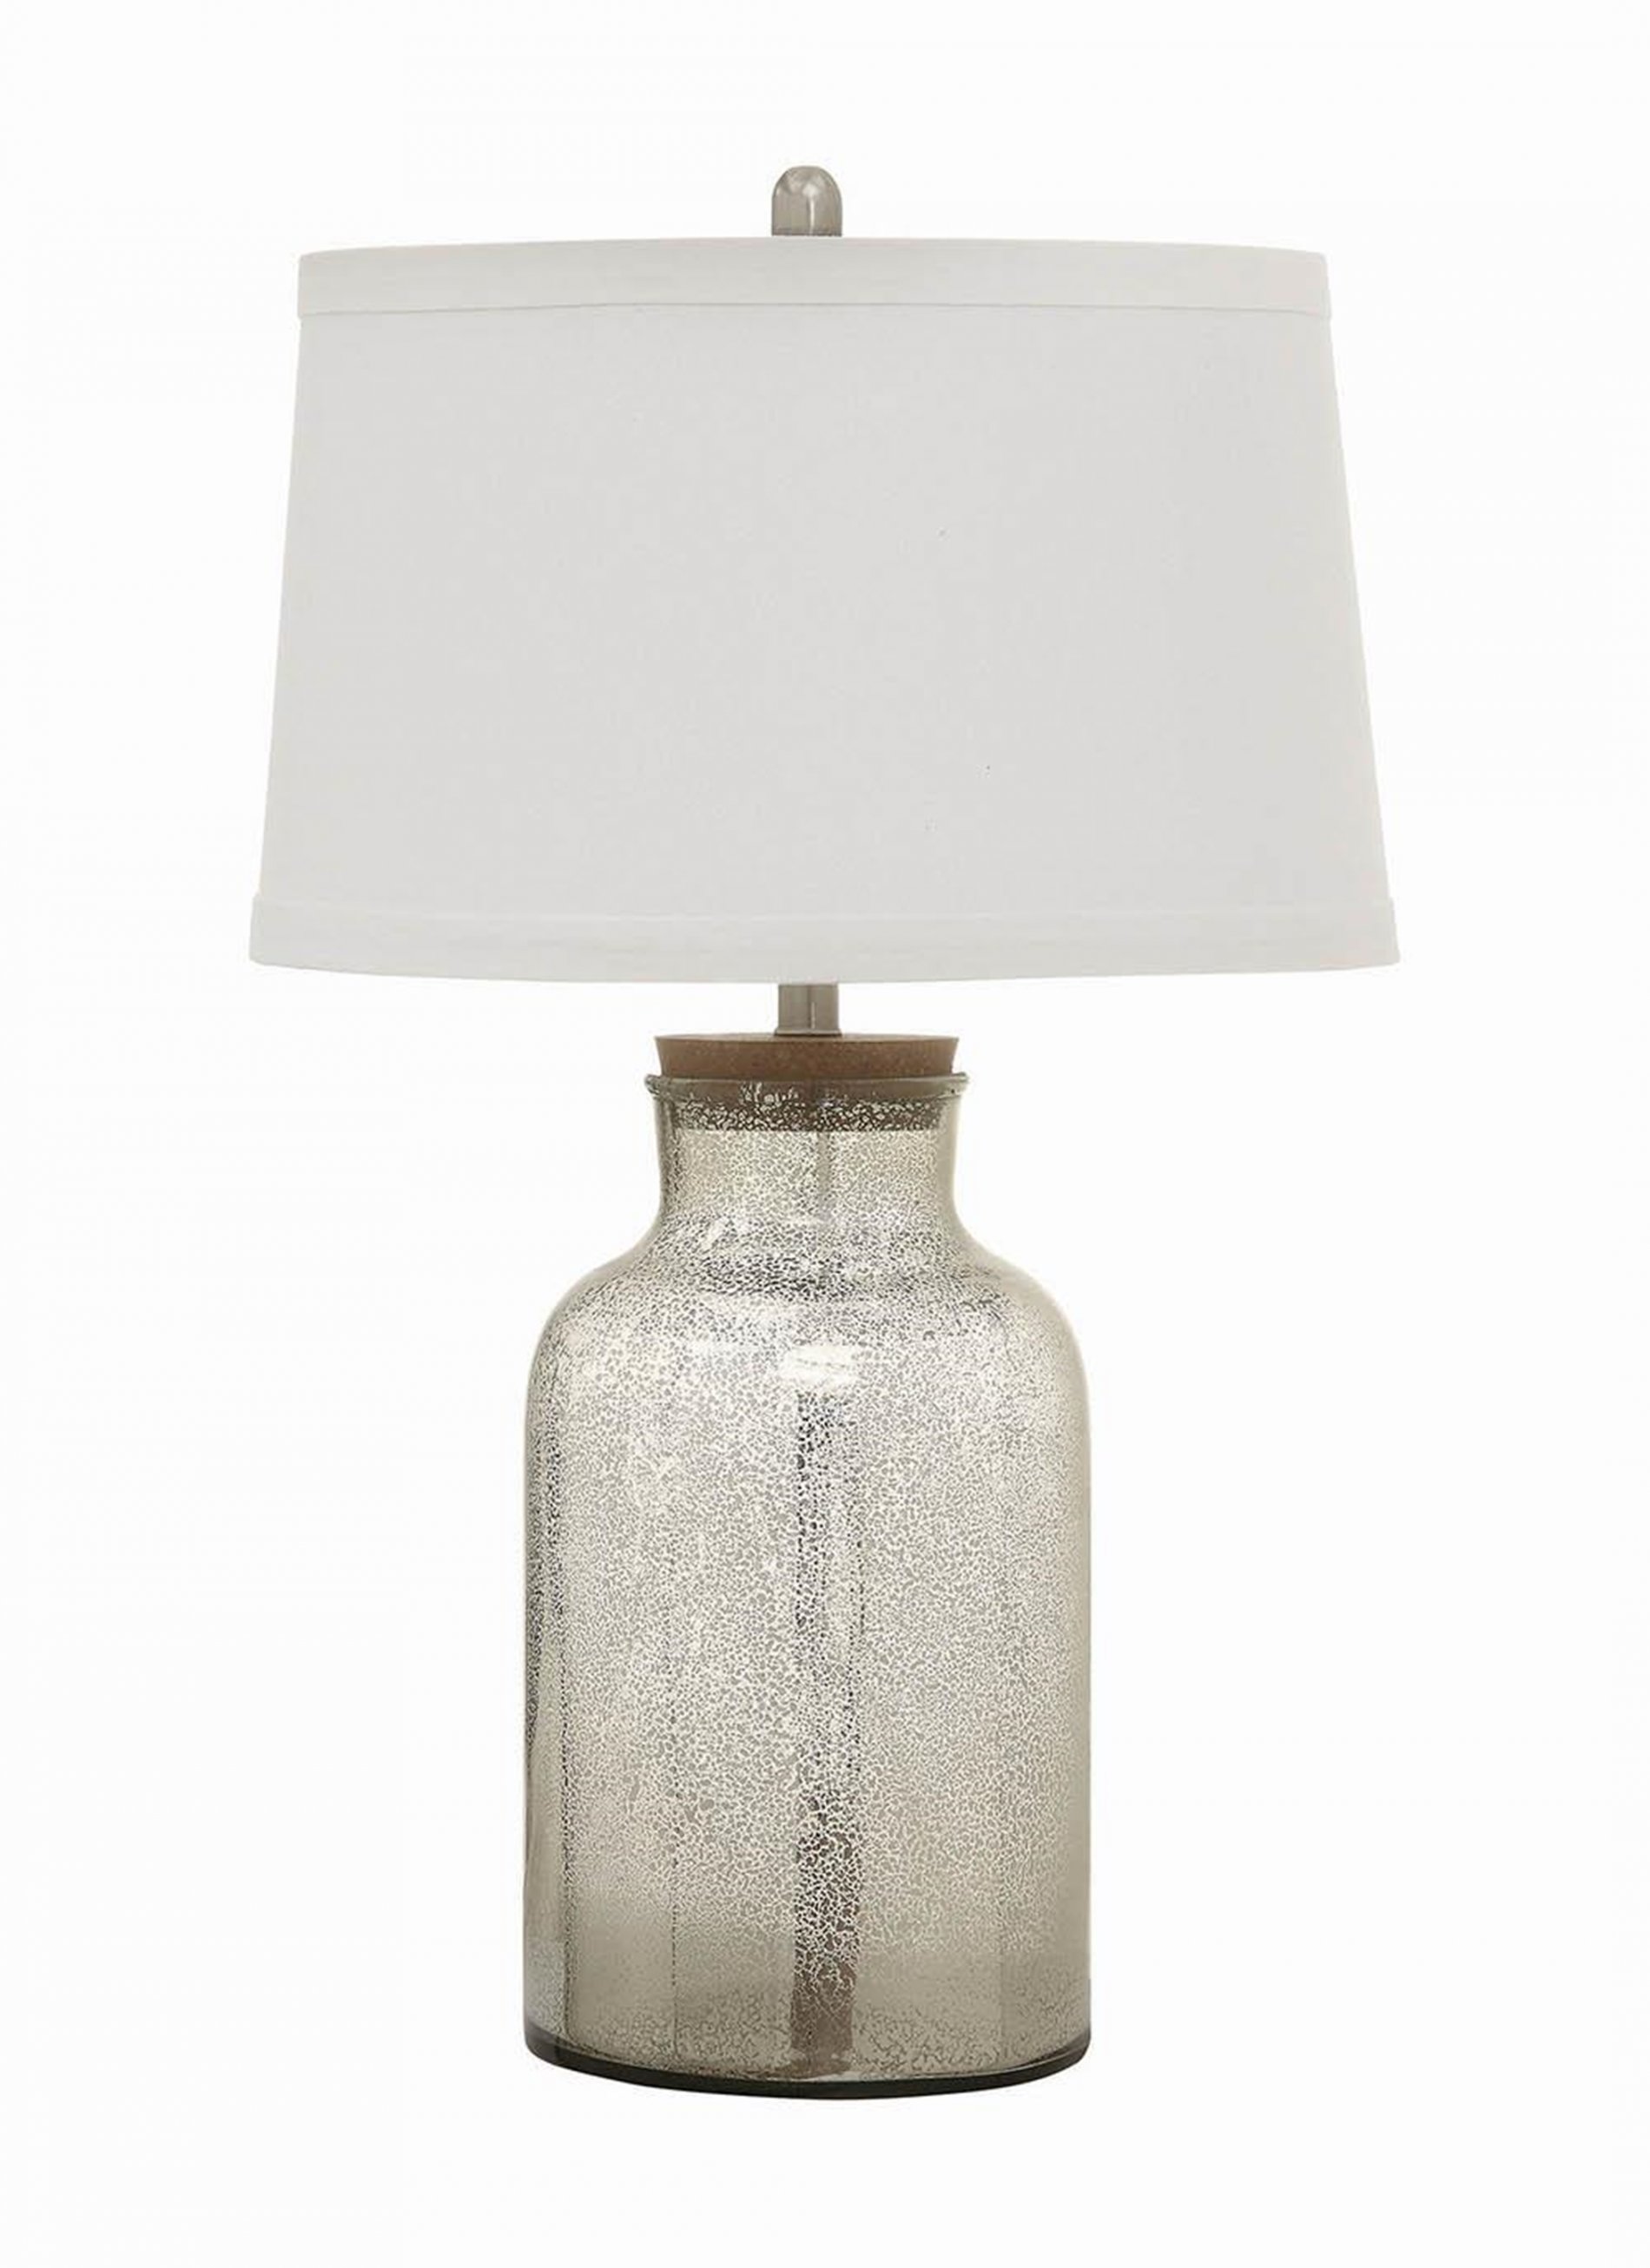 Antique Mercury Speckled Table Lamp - Click Image to Close